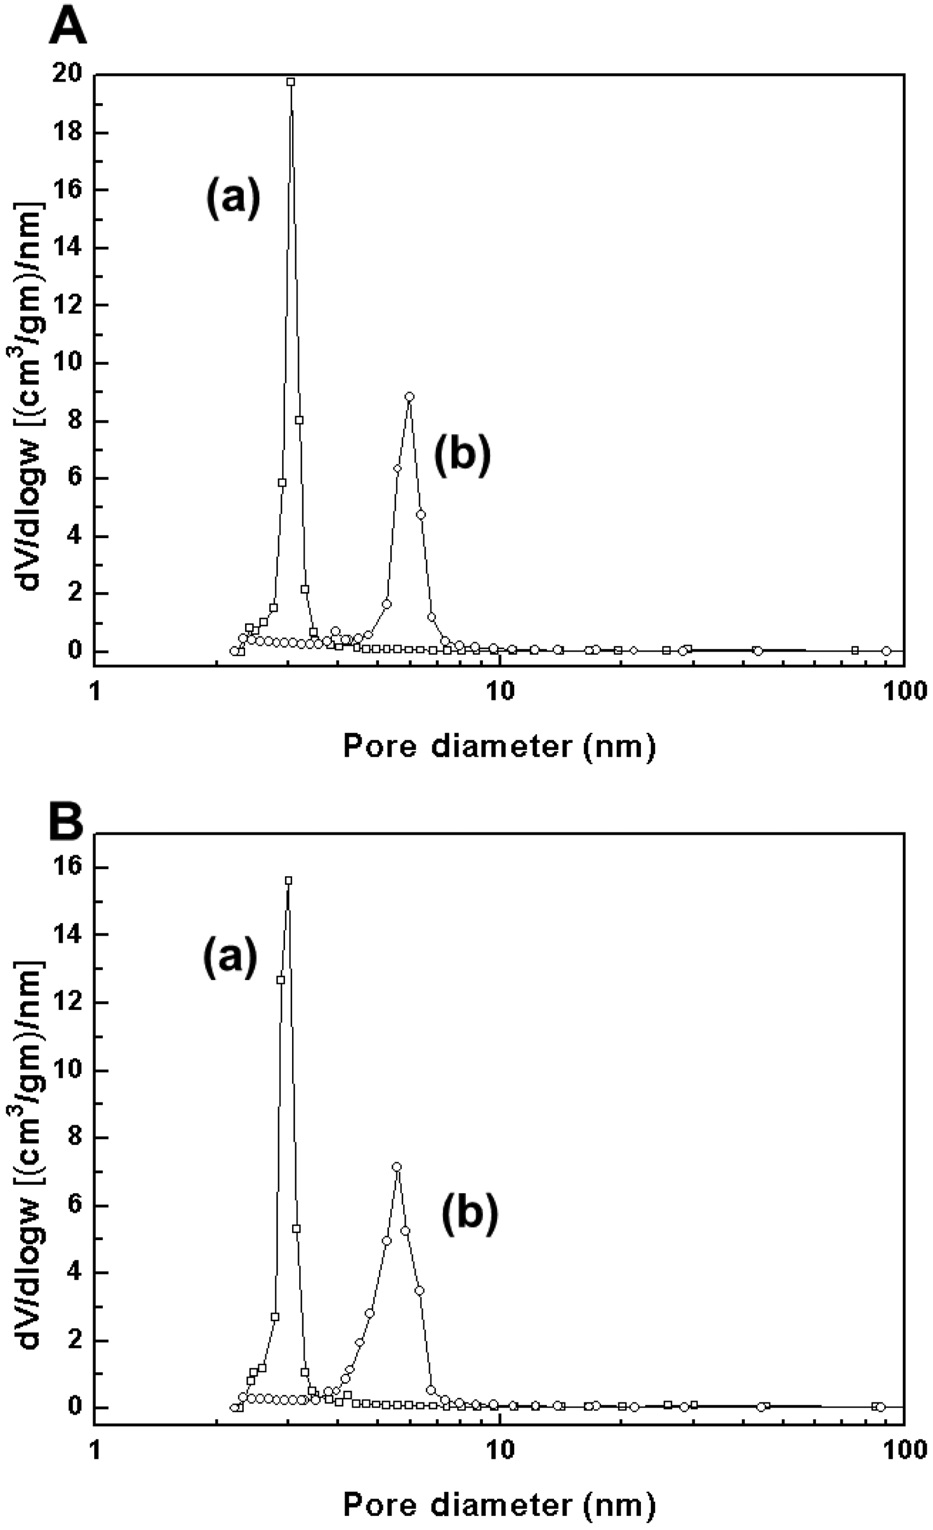 Pore size distribution of mesoporous support materials before reaction. (A) Original mesoporous supports: (a) MCM-41 and (b) SBA-15; (B) 3 wt% Pd-1 wt% Cu loaded mesoporous supports: (a) Pd-Cu/MCM-41 and (b) Pd-Cu/SBA-15.